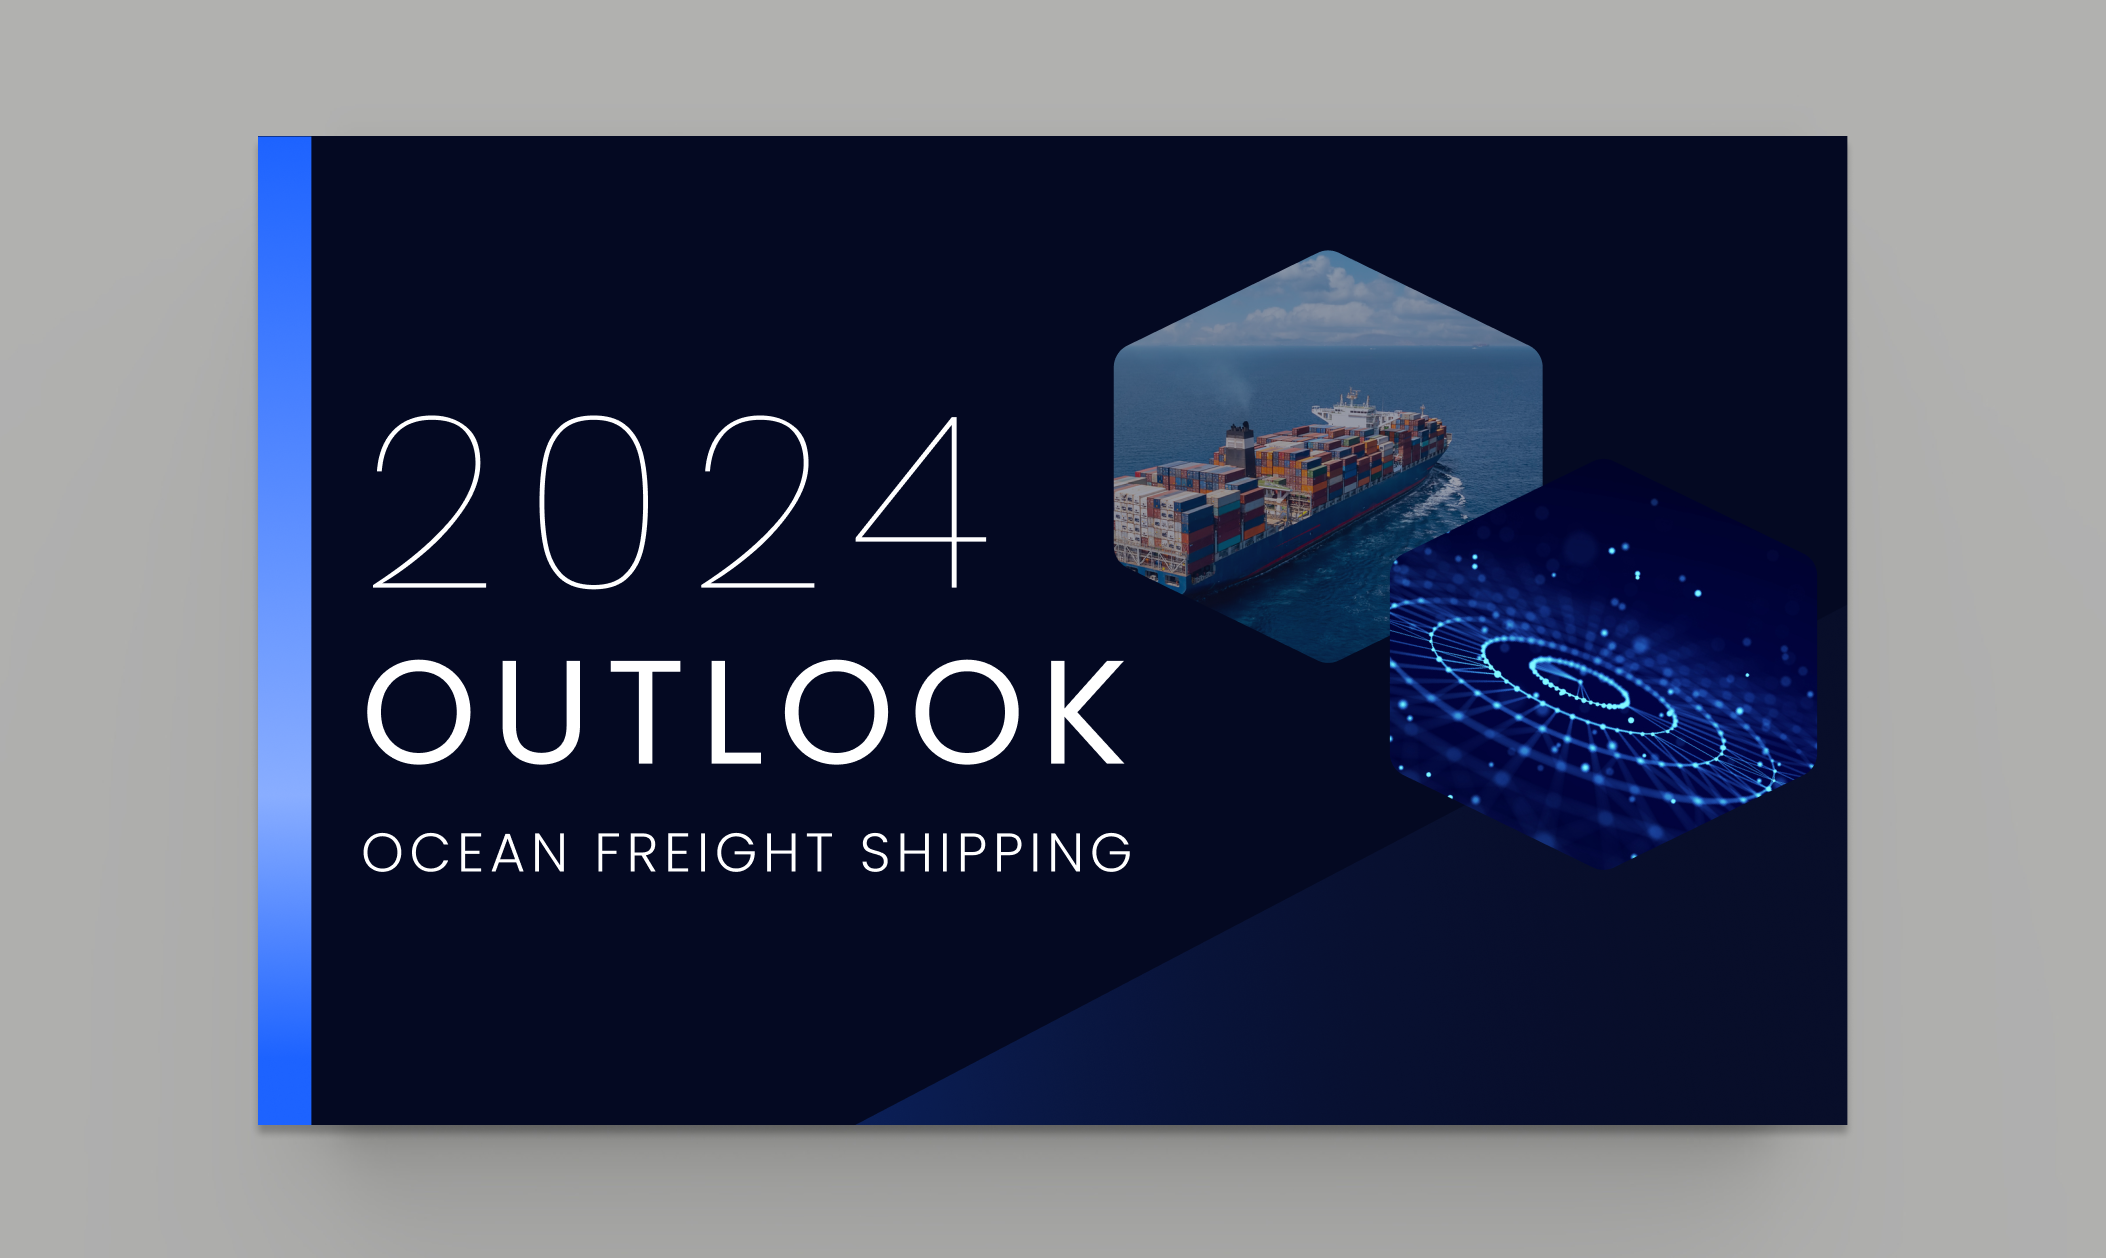 Xeneta forecasts a stormy 2024 as shipping lines set sights on freight rate increases